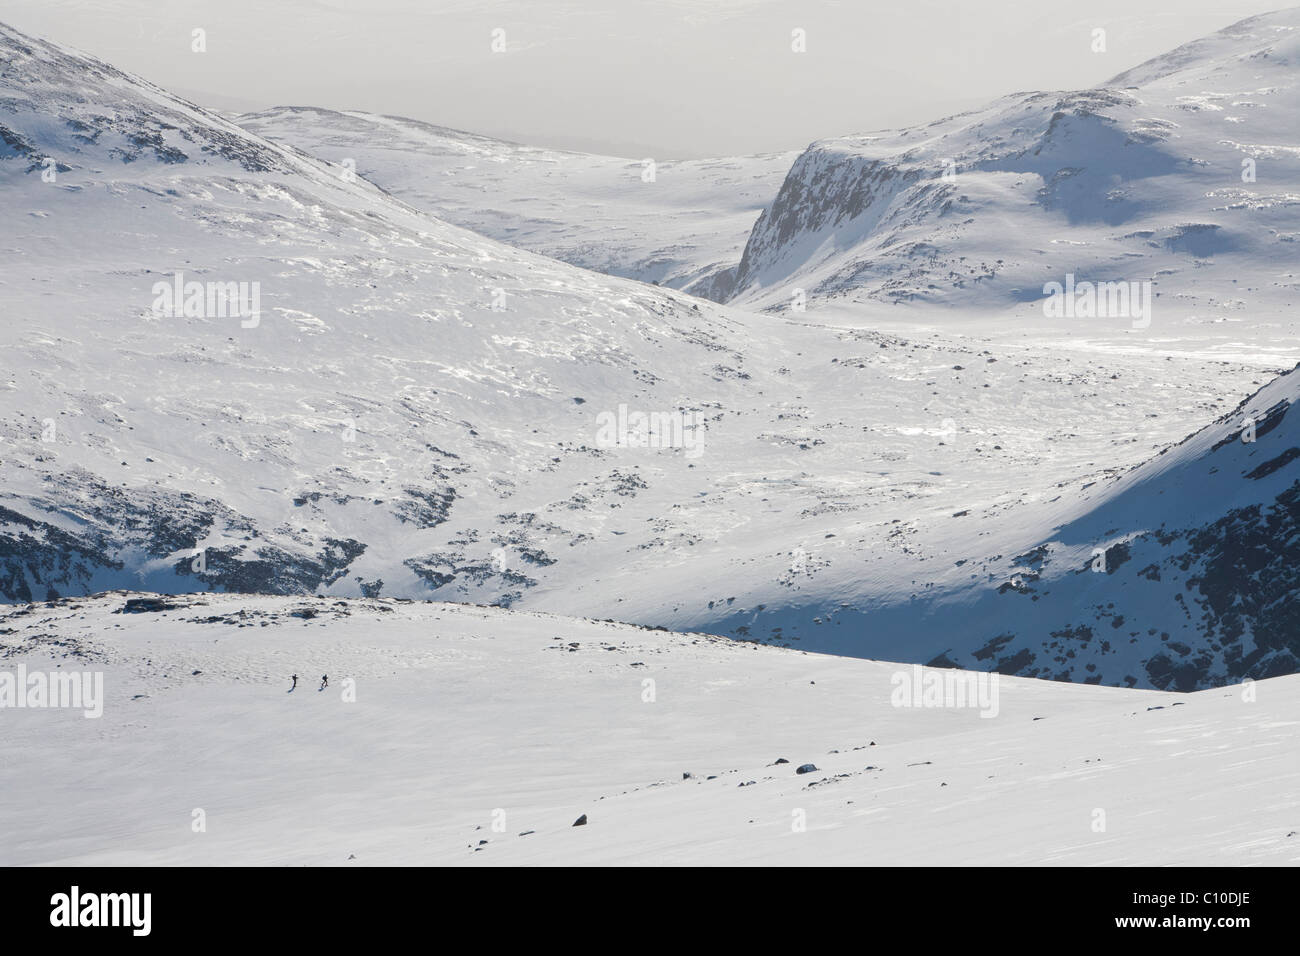 Ski mountaineers on the Cairngorm Plateau in full winter conditions, Scotland, UK. Stock Photo